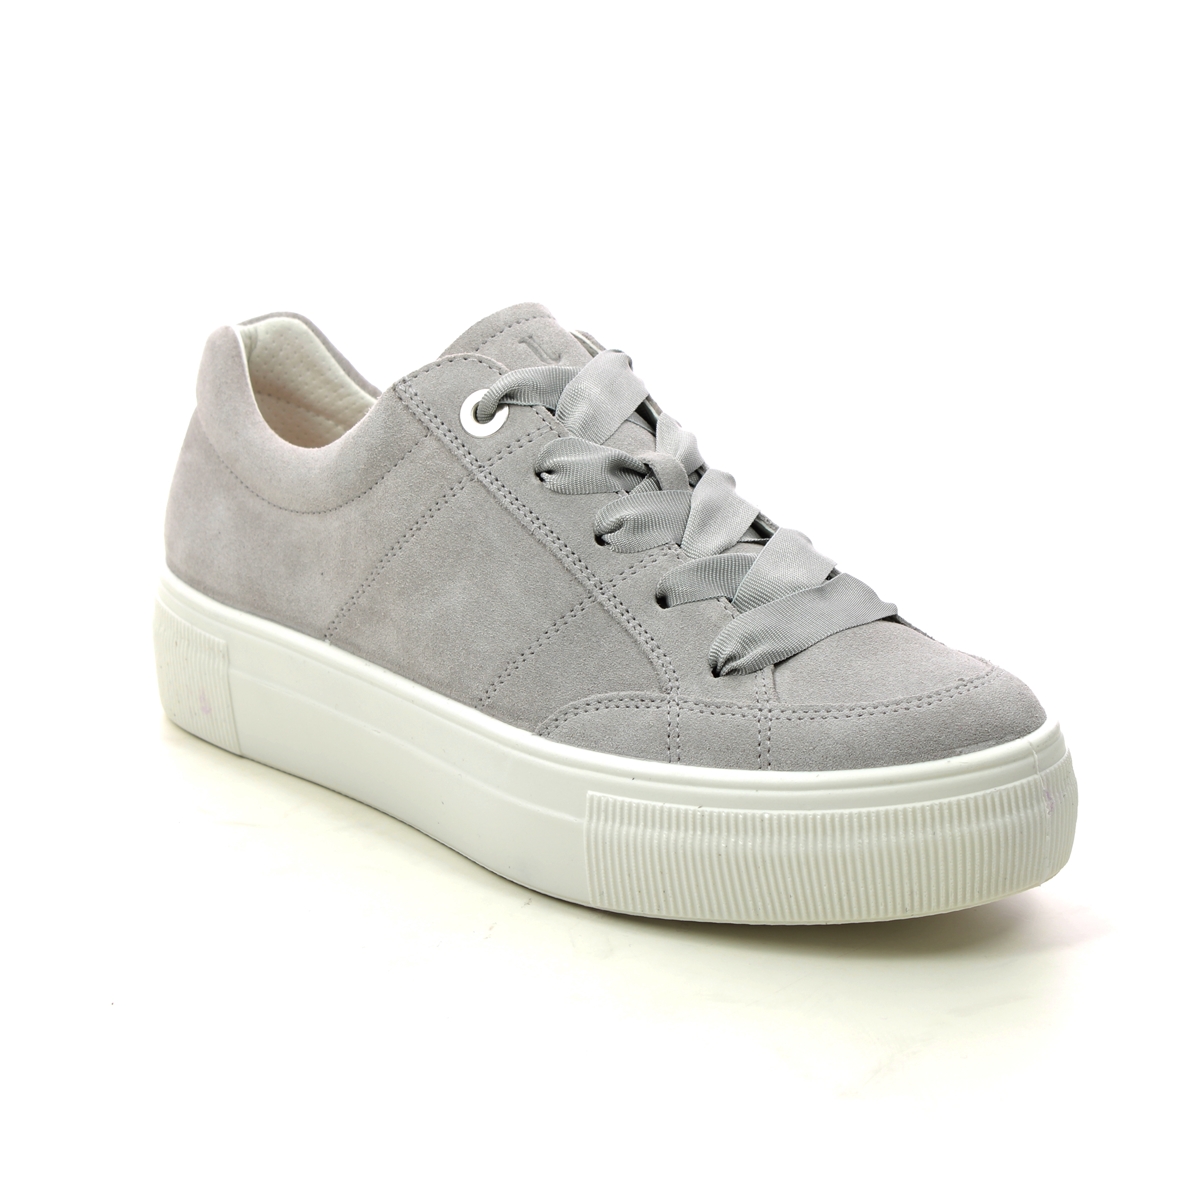 Legero Lima Stitch Light Grey Suede Womens Trainers 0600910-2500 In Size 39 In Plain Light Grey Suede